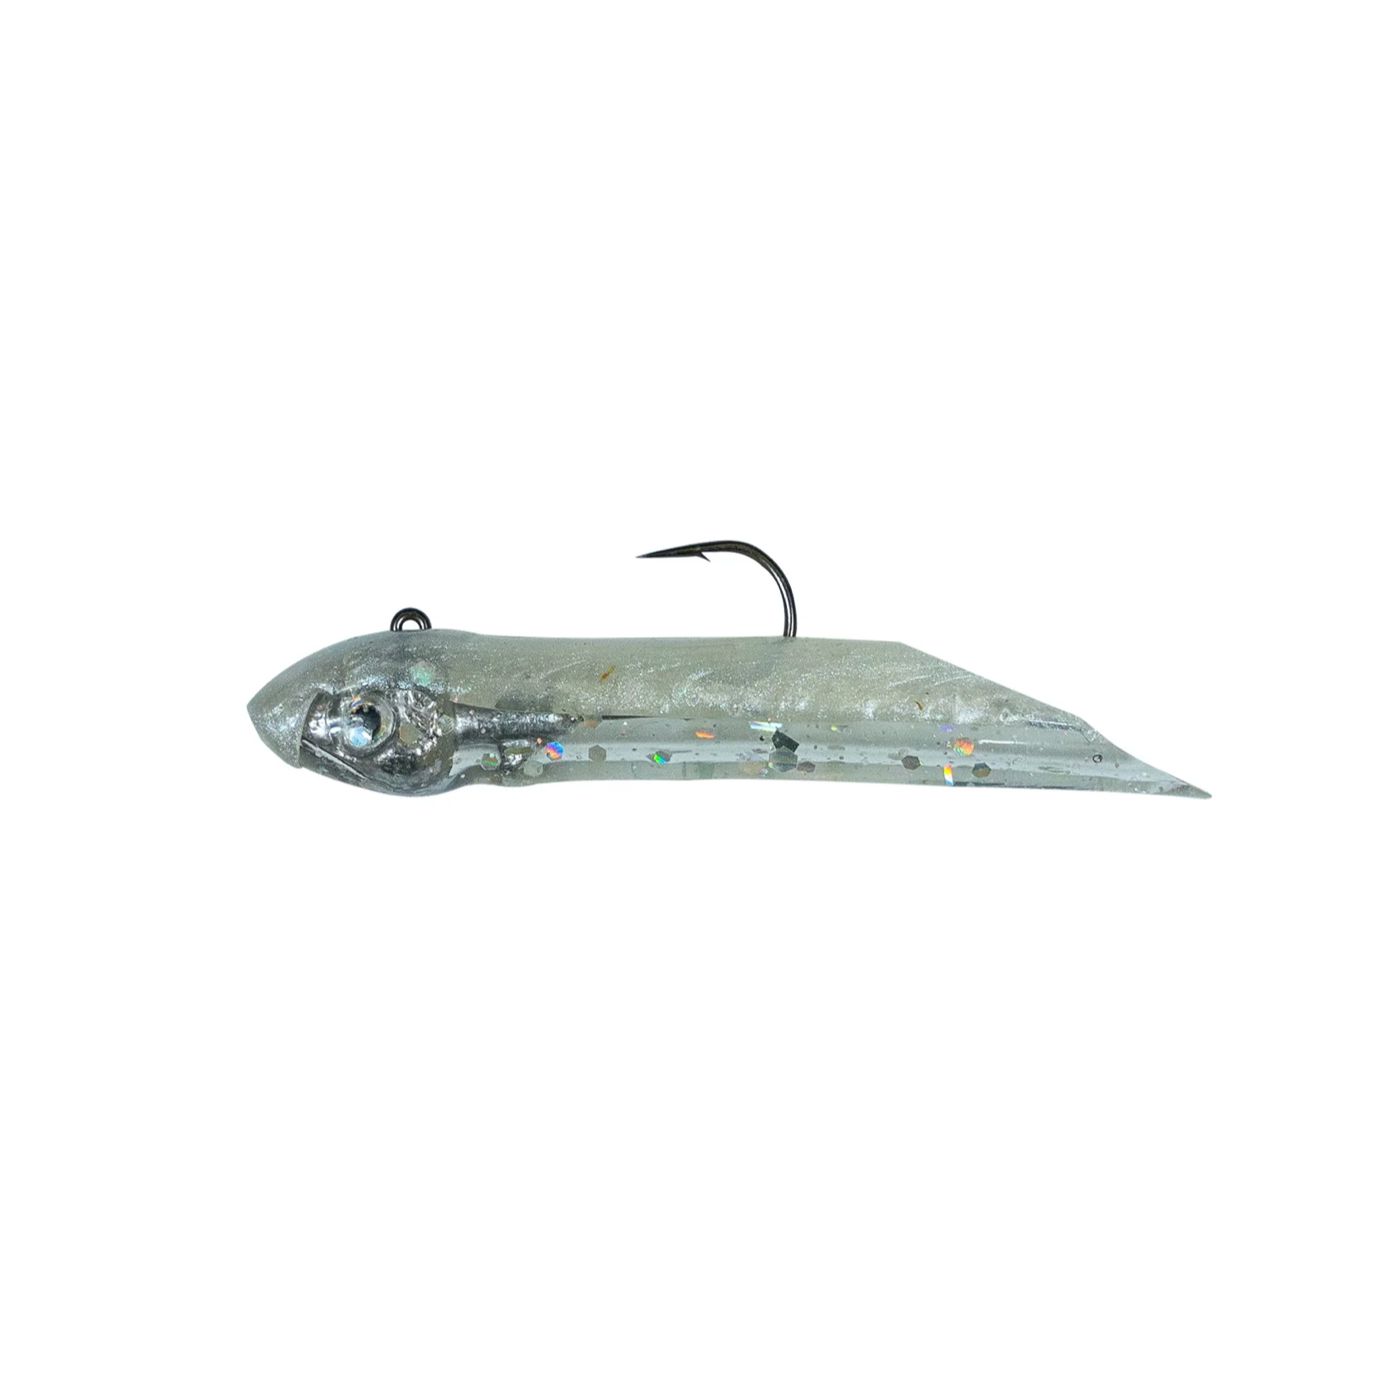  Shad Dart Fishing Lure Hook Size 8 1/32 Ounce 12 Pack